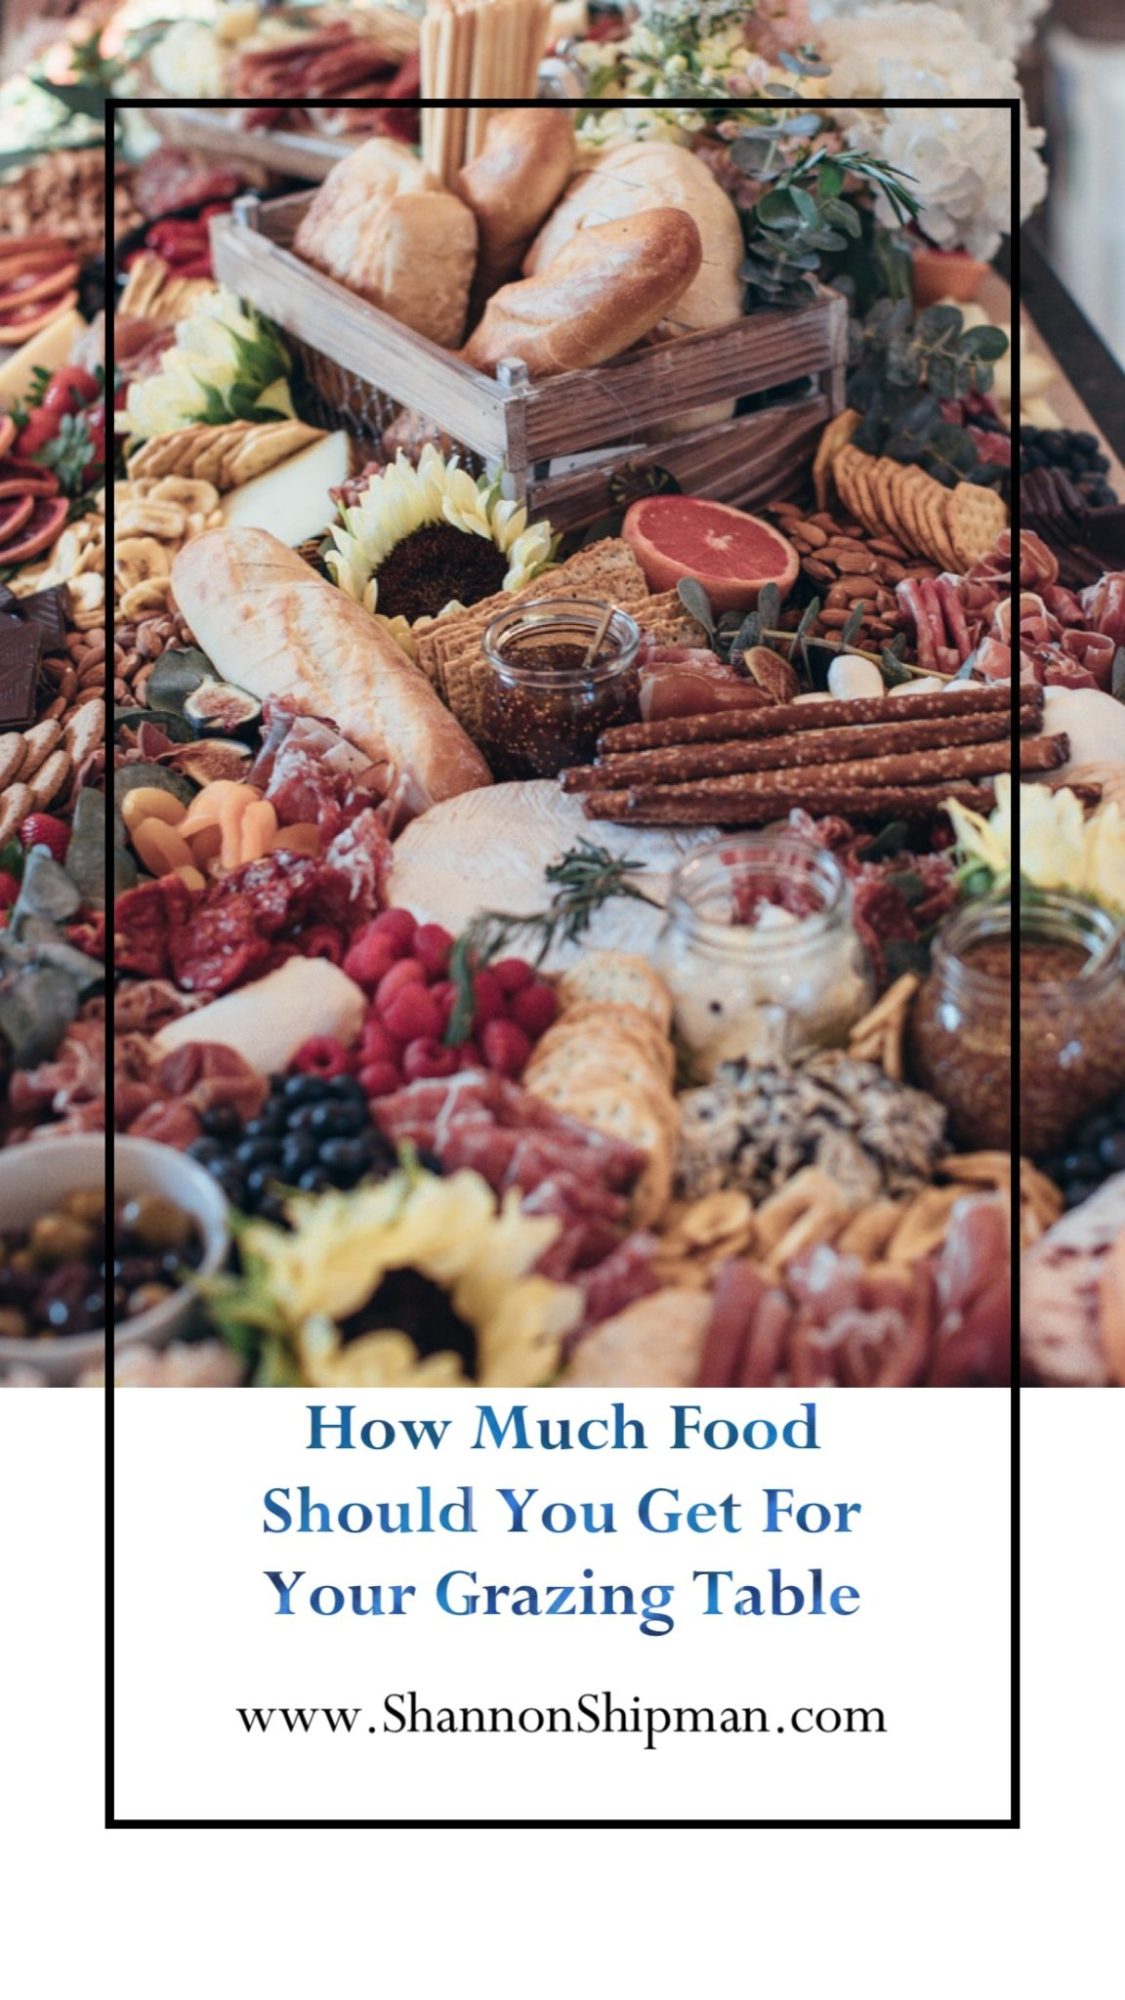 How Much Food Should you Get for your Grazing Table? Tips featured by top US lifestyle blogger, Shannon Shipman